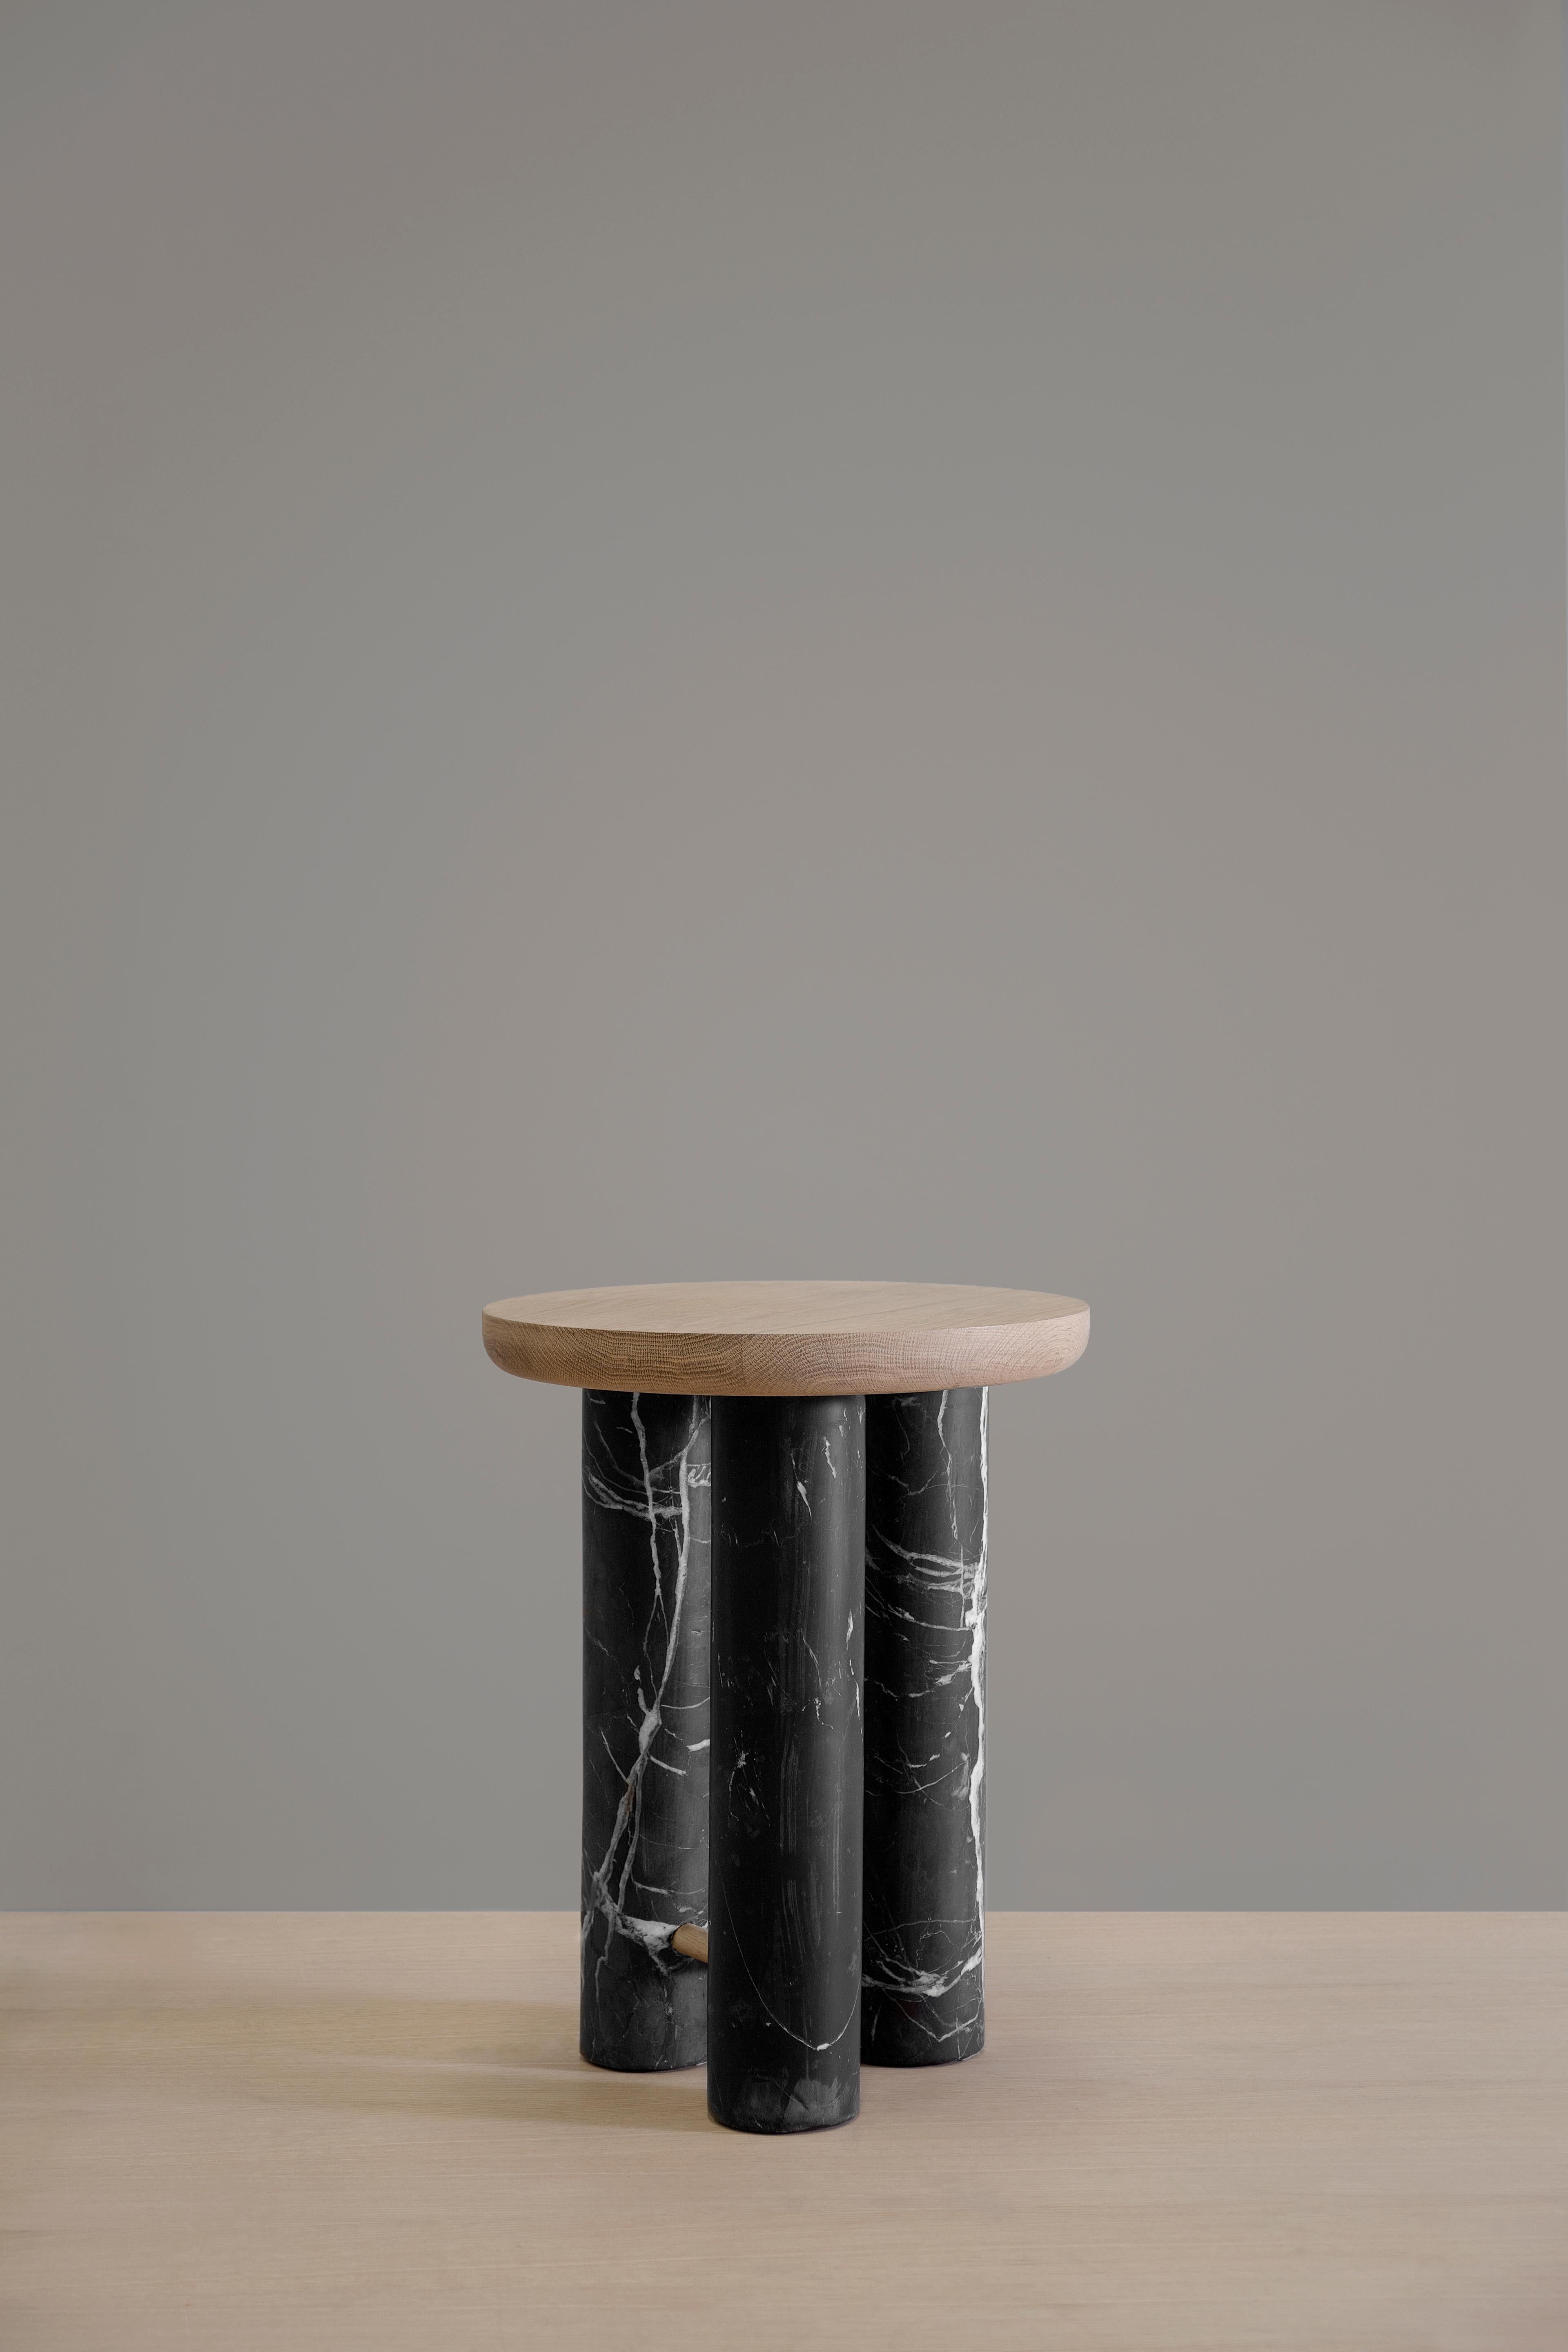 Antropología 01 is an oak and marble stool and side table designed by Raul de la Cerda for BREUER ESTUDIO. This pies is part of Antropología Collection in which Raul collaborated with BREUER to create exceptional pieces. 

Raul de la Cerda is an